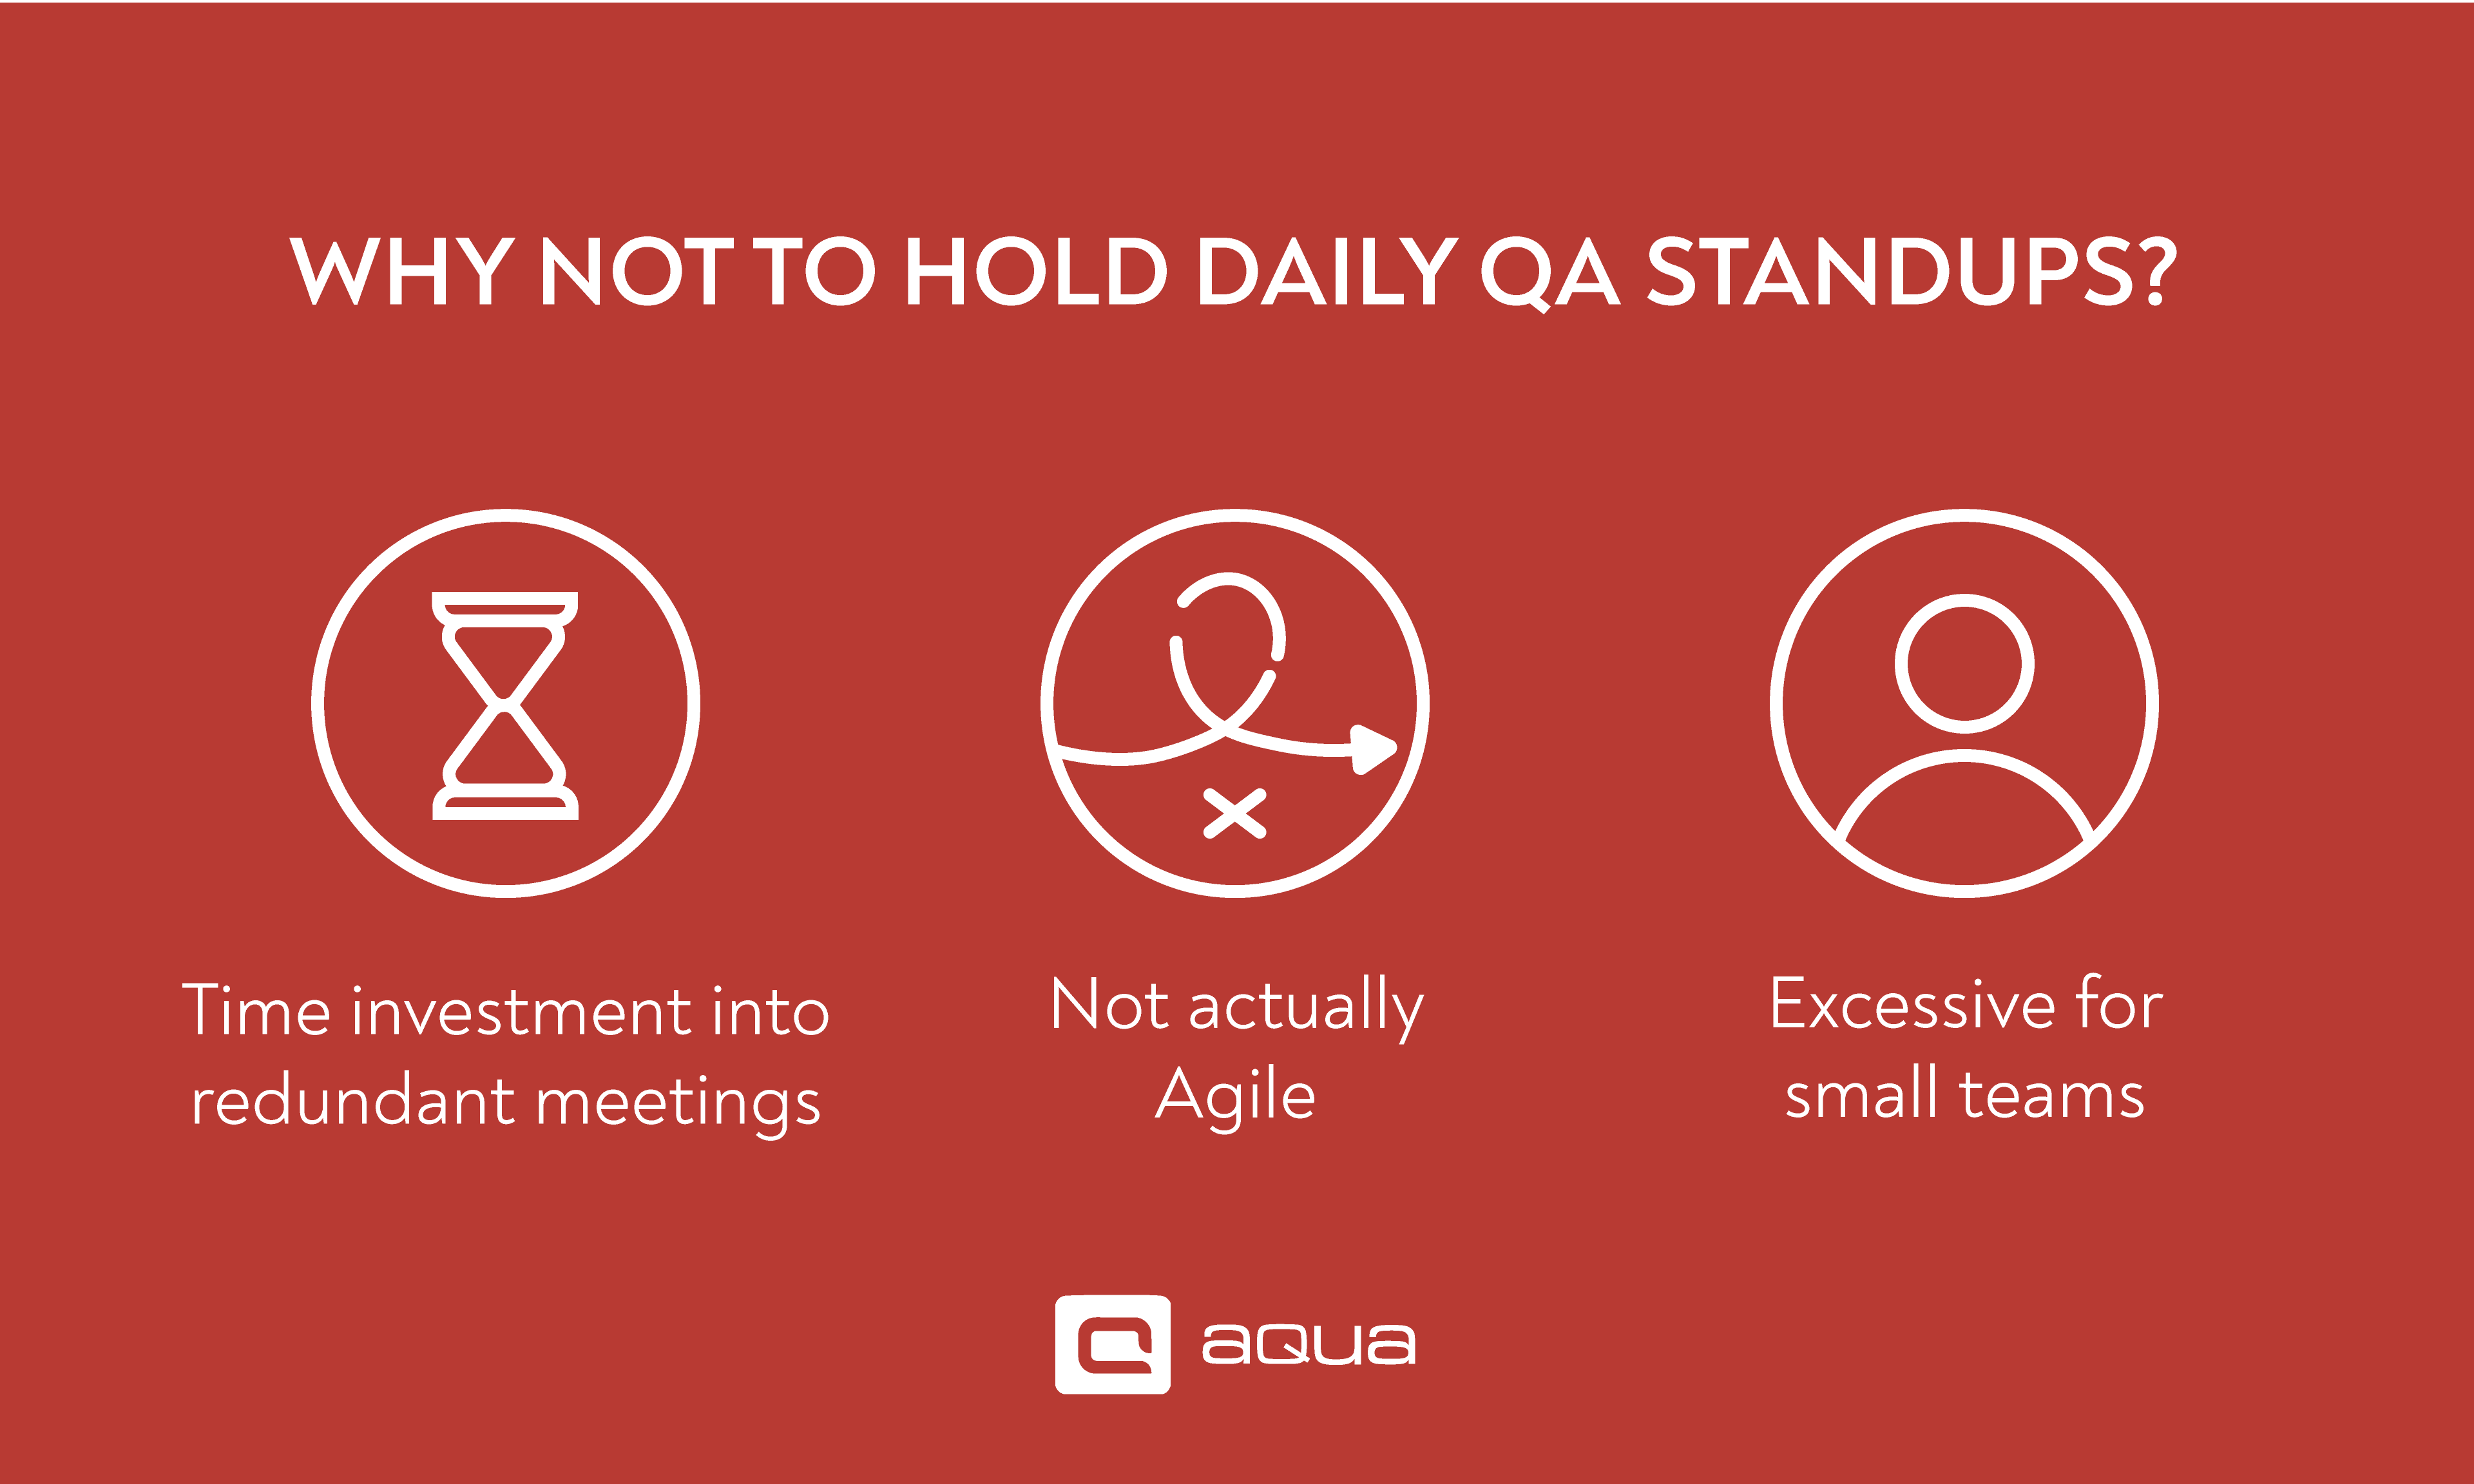 Why not to hold daily QA standups